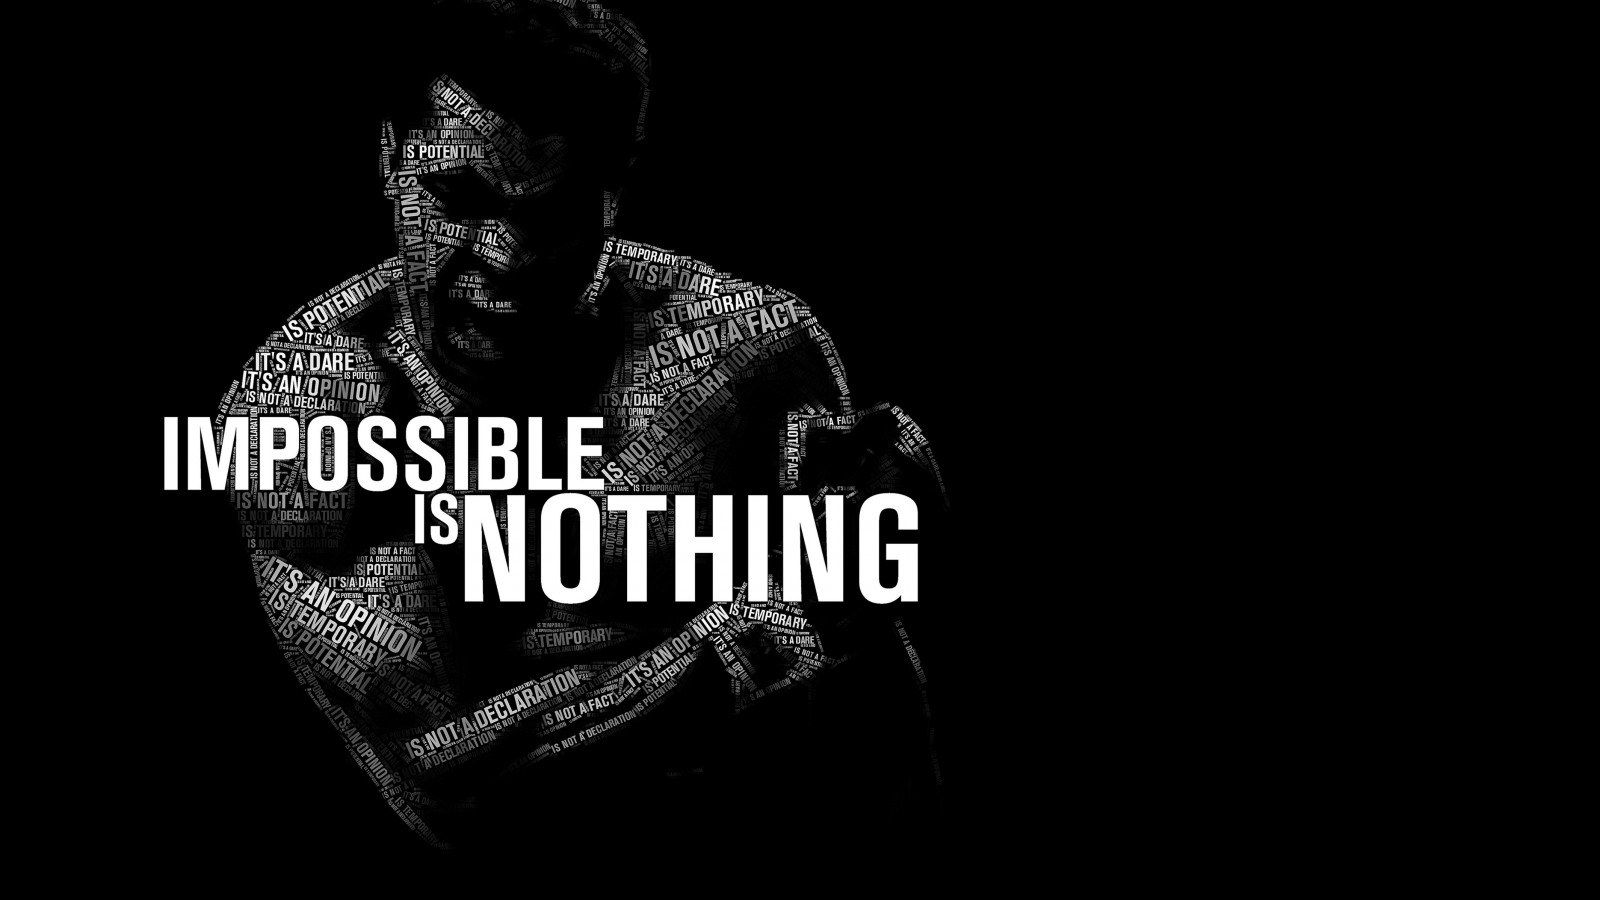 Impossible Is Nothing - Muhammad Ali Wallpaper for Desktop 1600x900